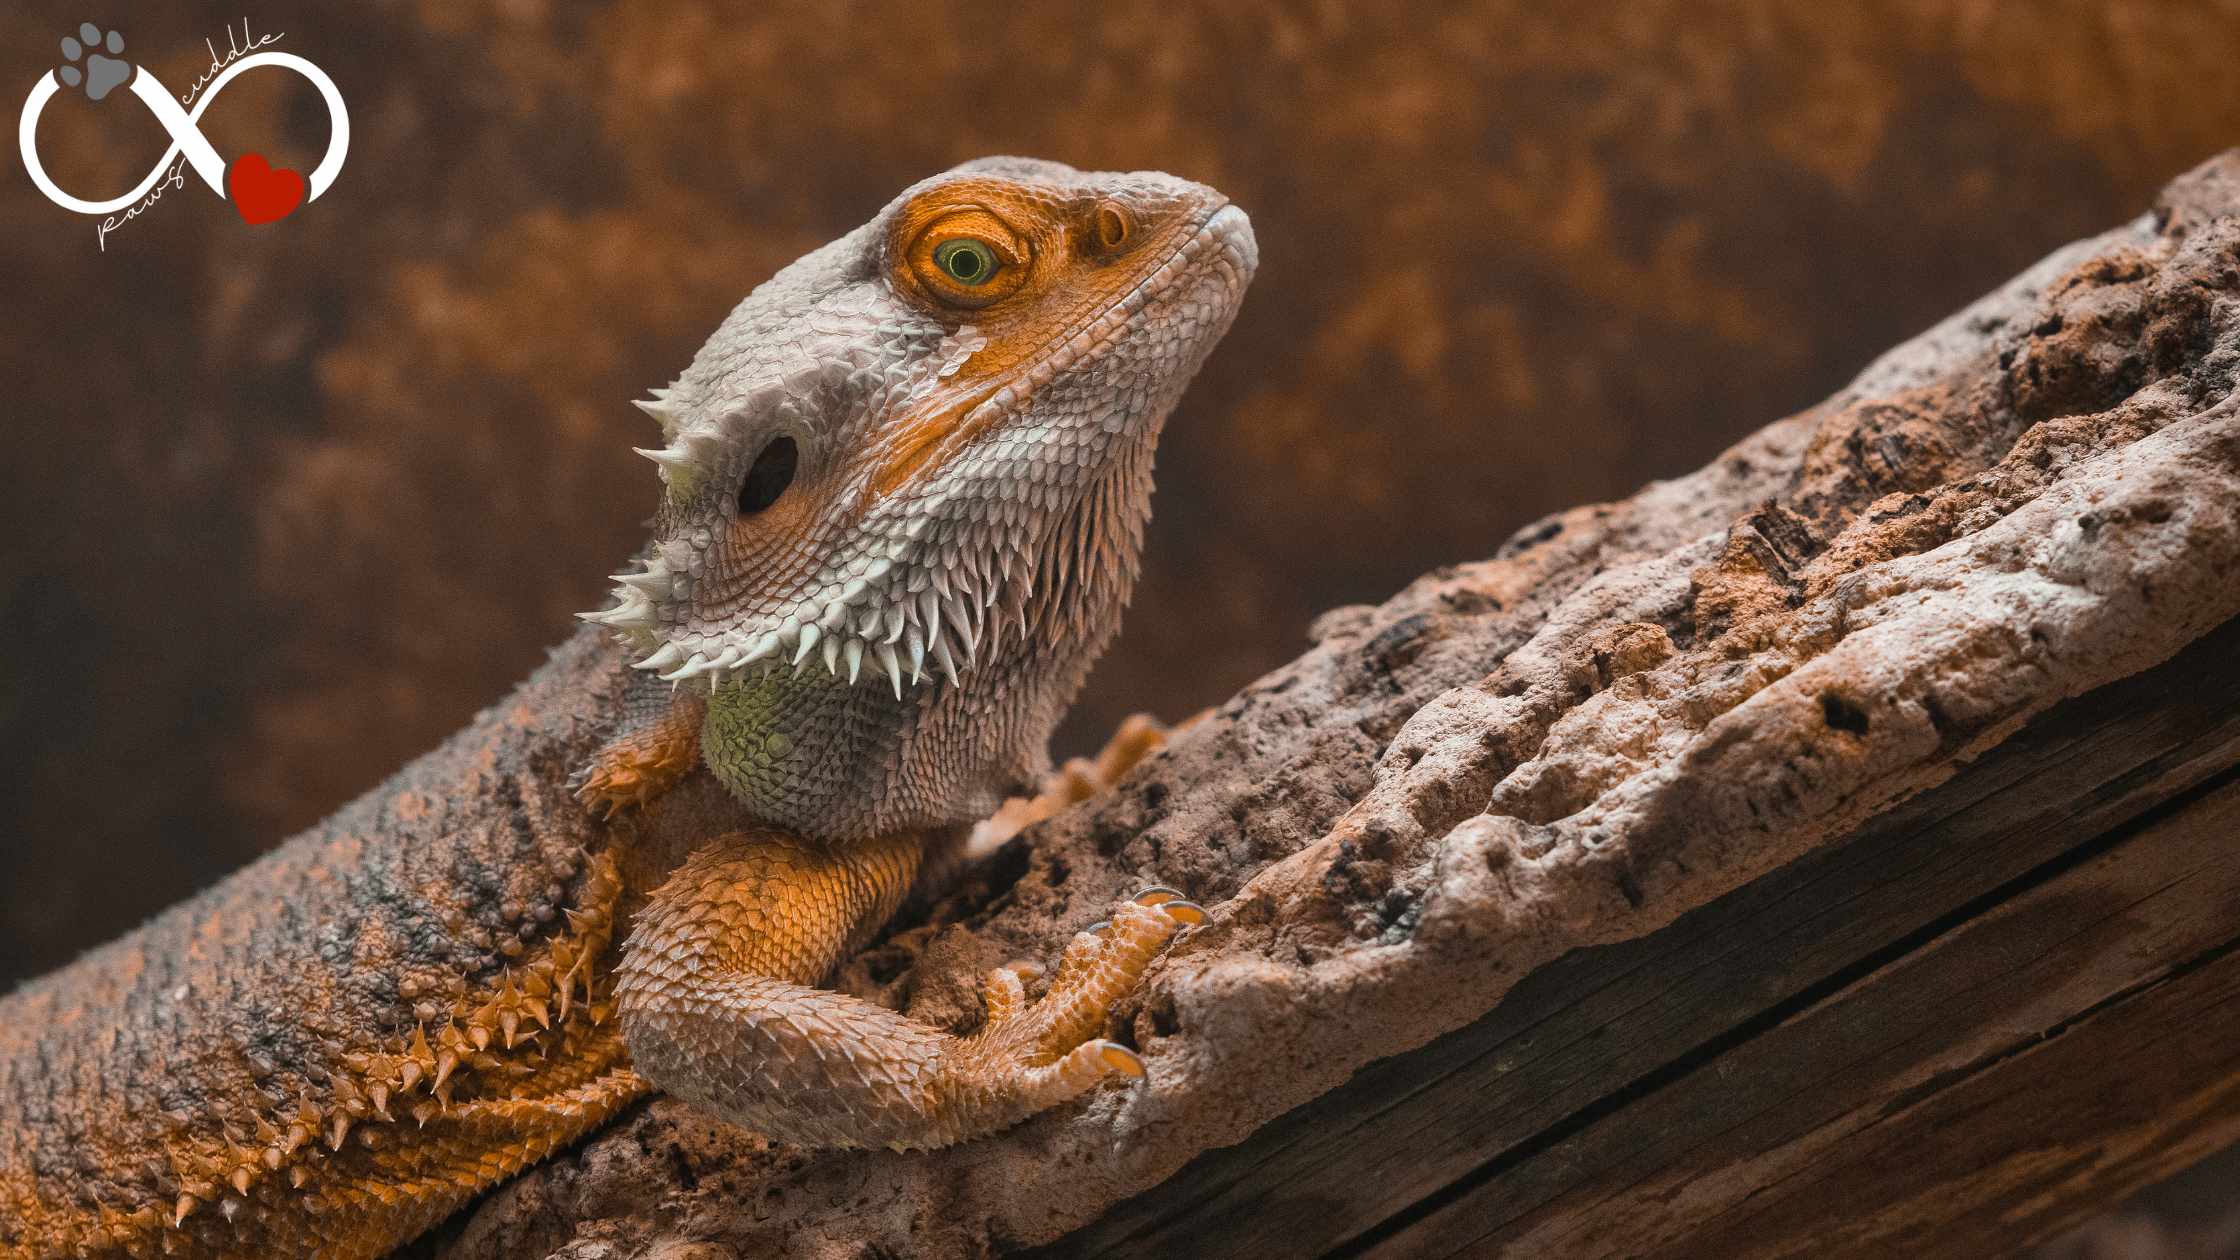 Do bearded dragons get lonely